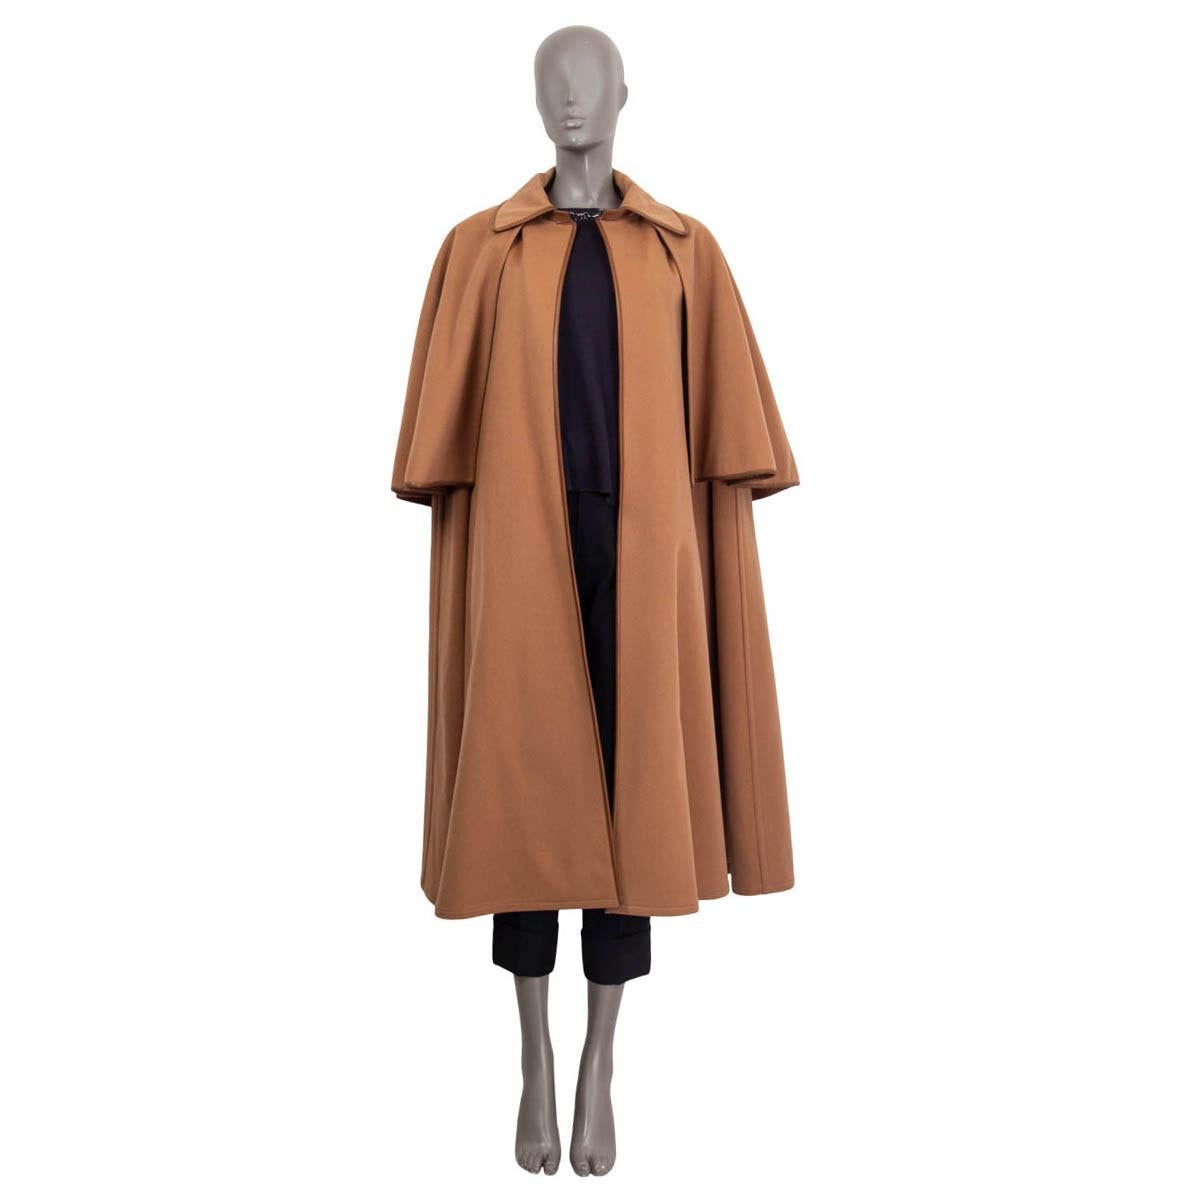 100% authentic Hermès vintage cape in camel brown wool (assumed cause tag is missing) and brown leather . Features a leather trim and two slits for the arms slits. Opens with a hook and a bar at the neck. Lined in leather under the collar and the.